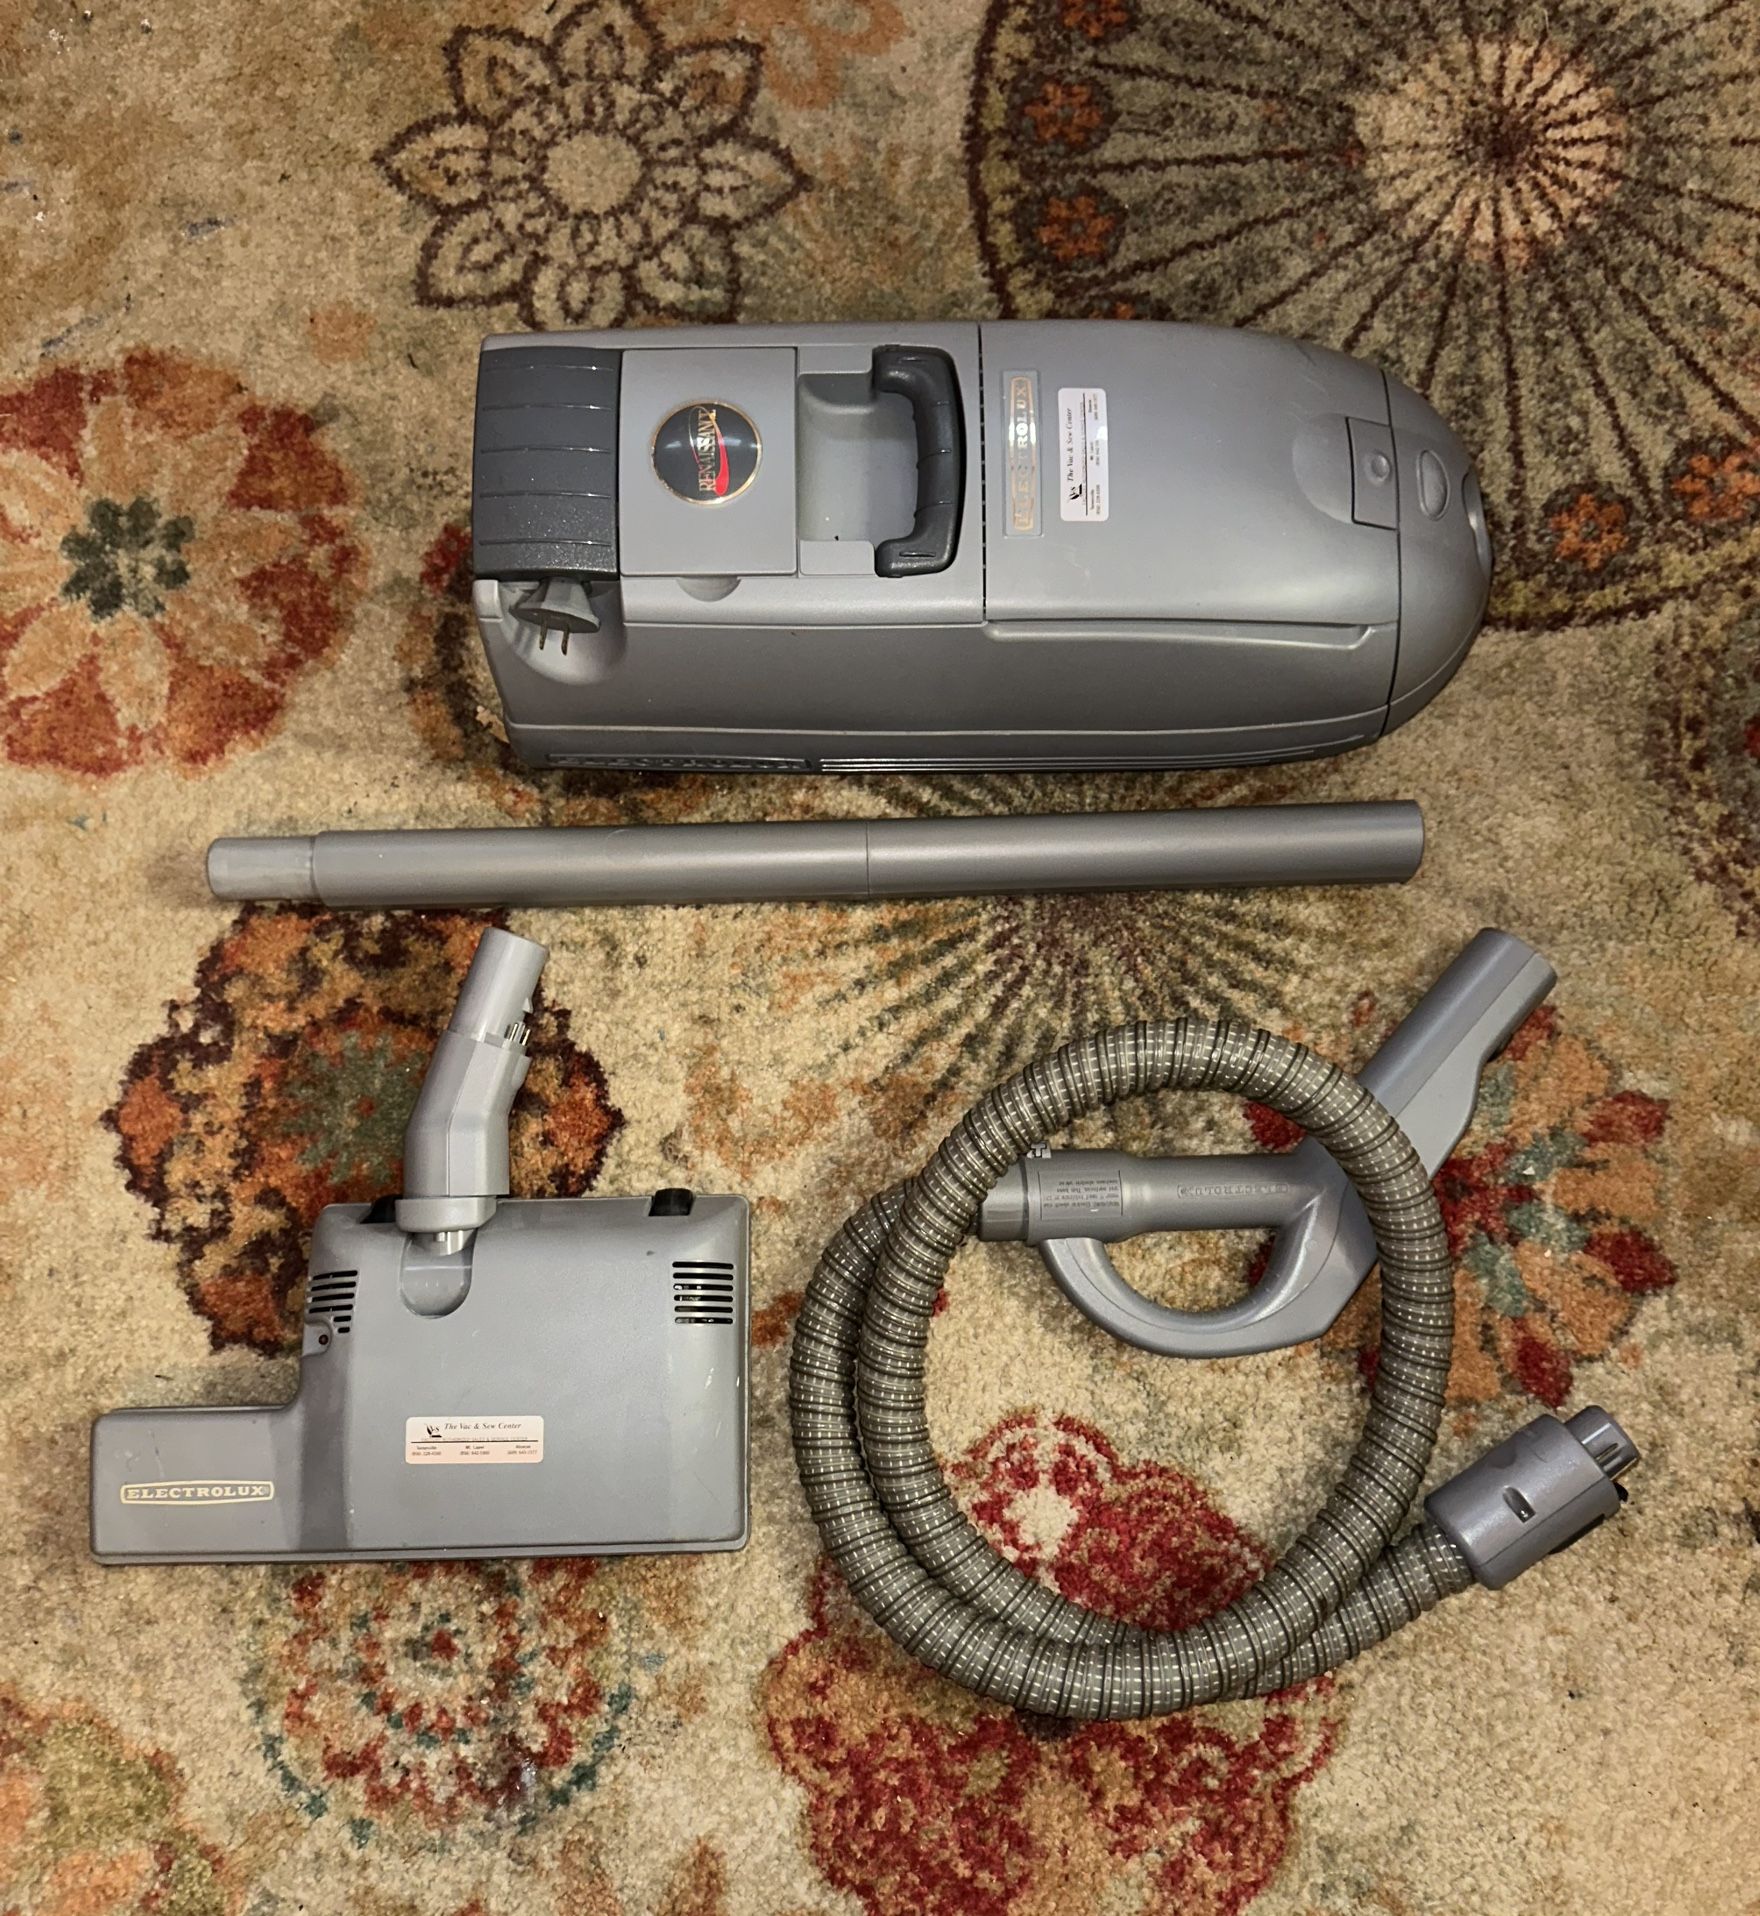 Electrolux Renaissance Canister Vacuum w/ All attachments EUC Tested M#C104H